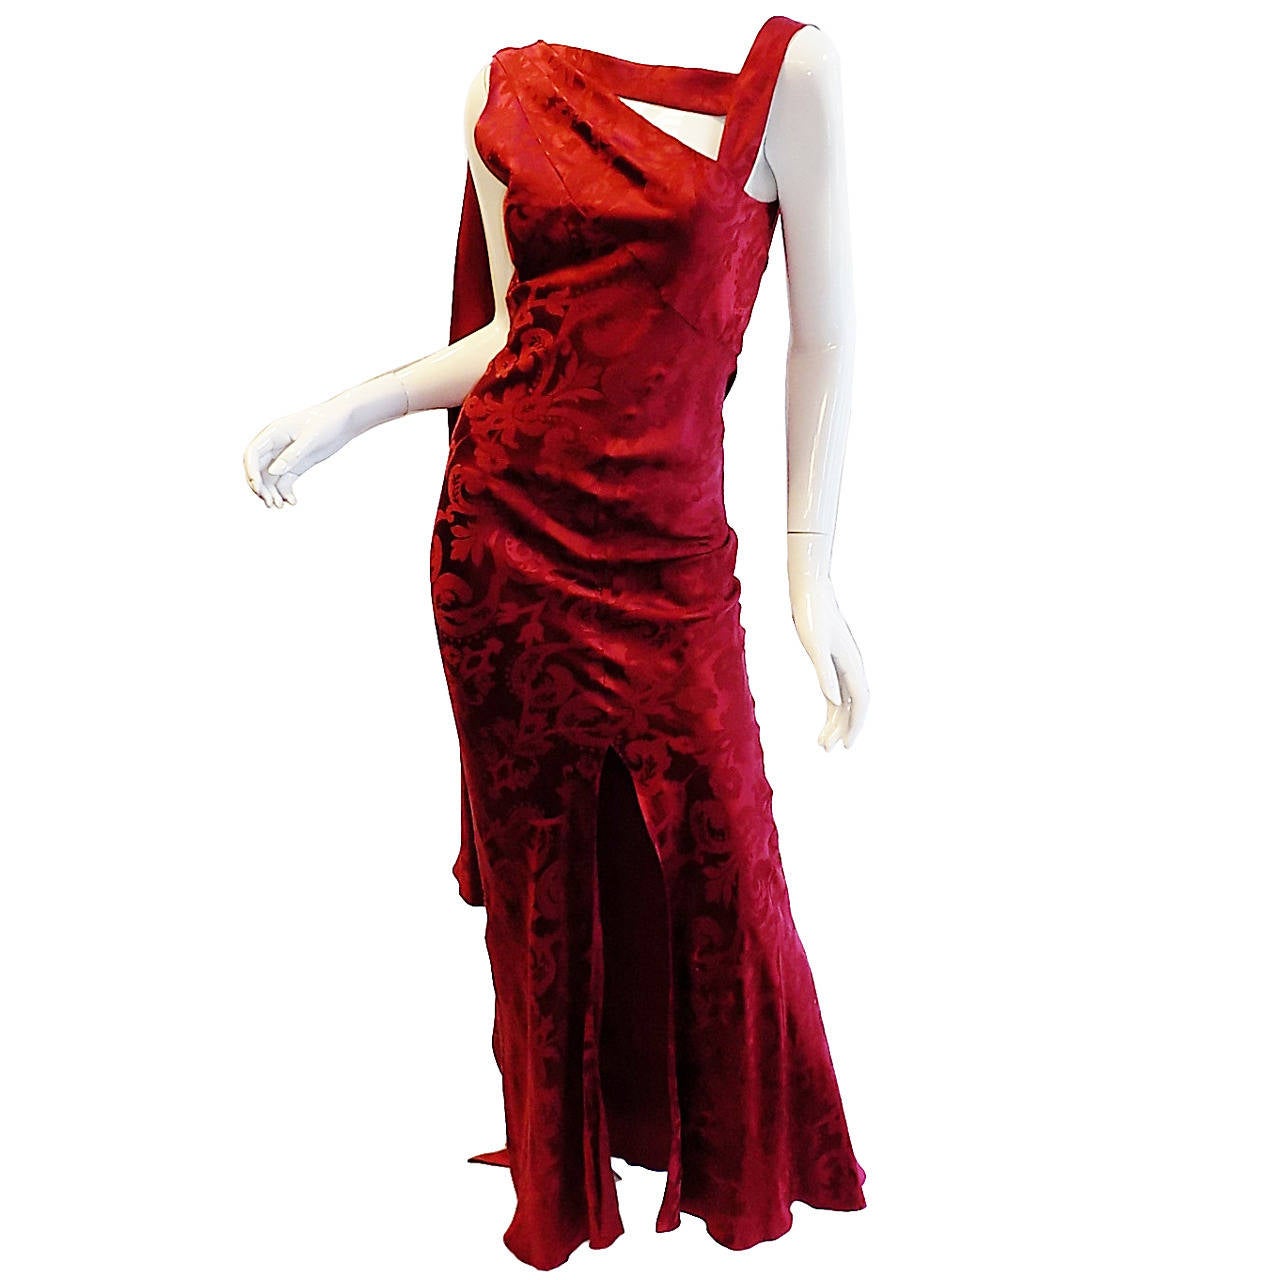 Christian Dior burgundy silk gown with long one shoulder drape  nwt $2445